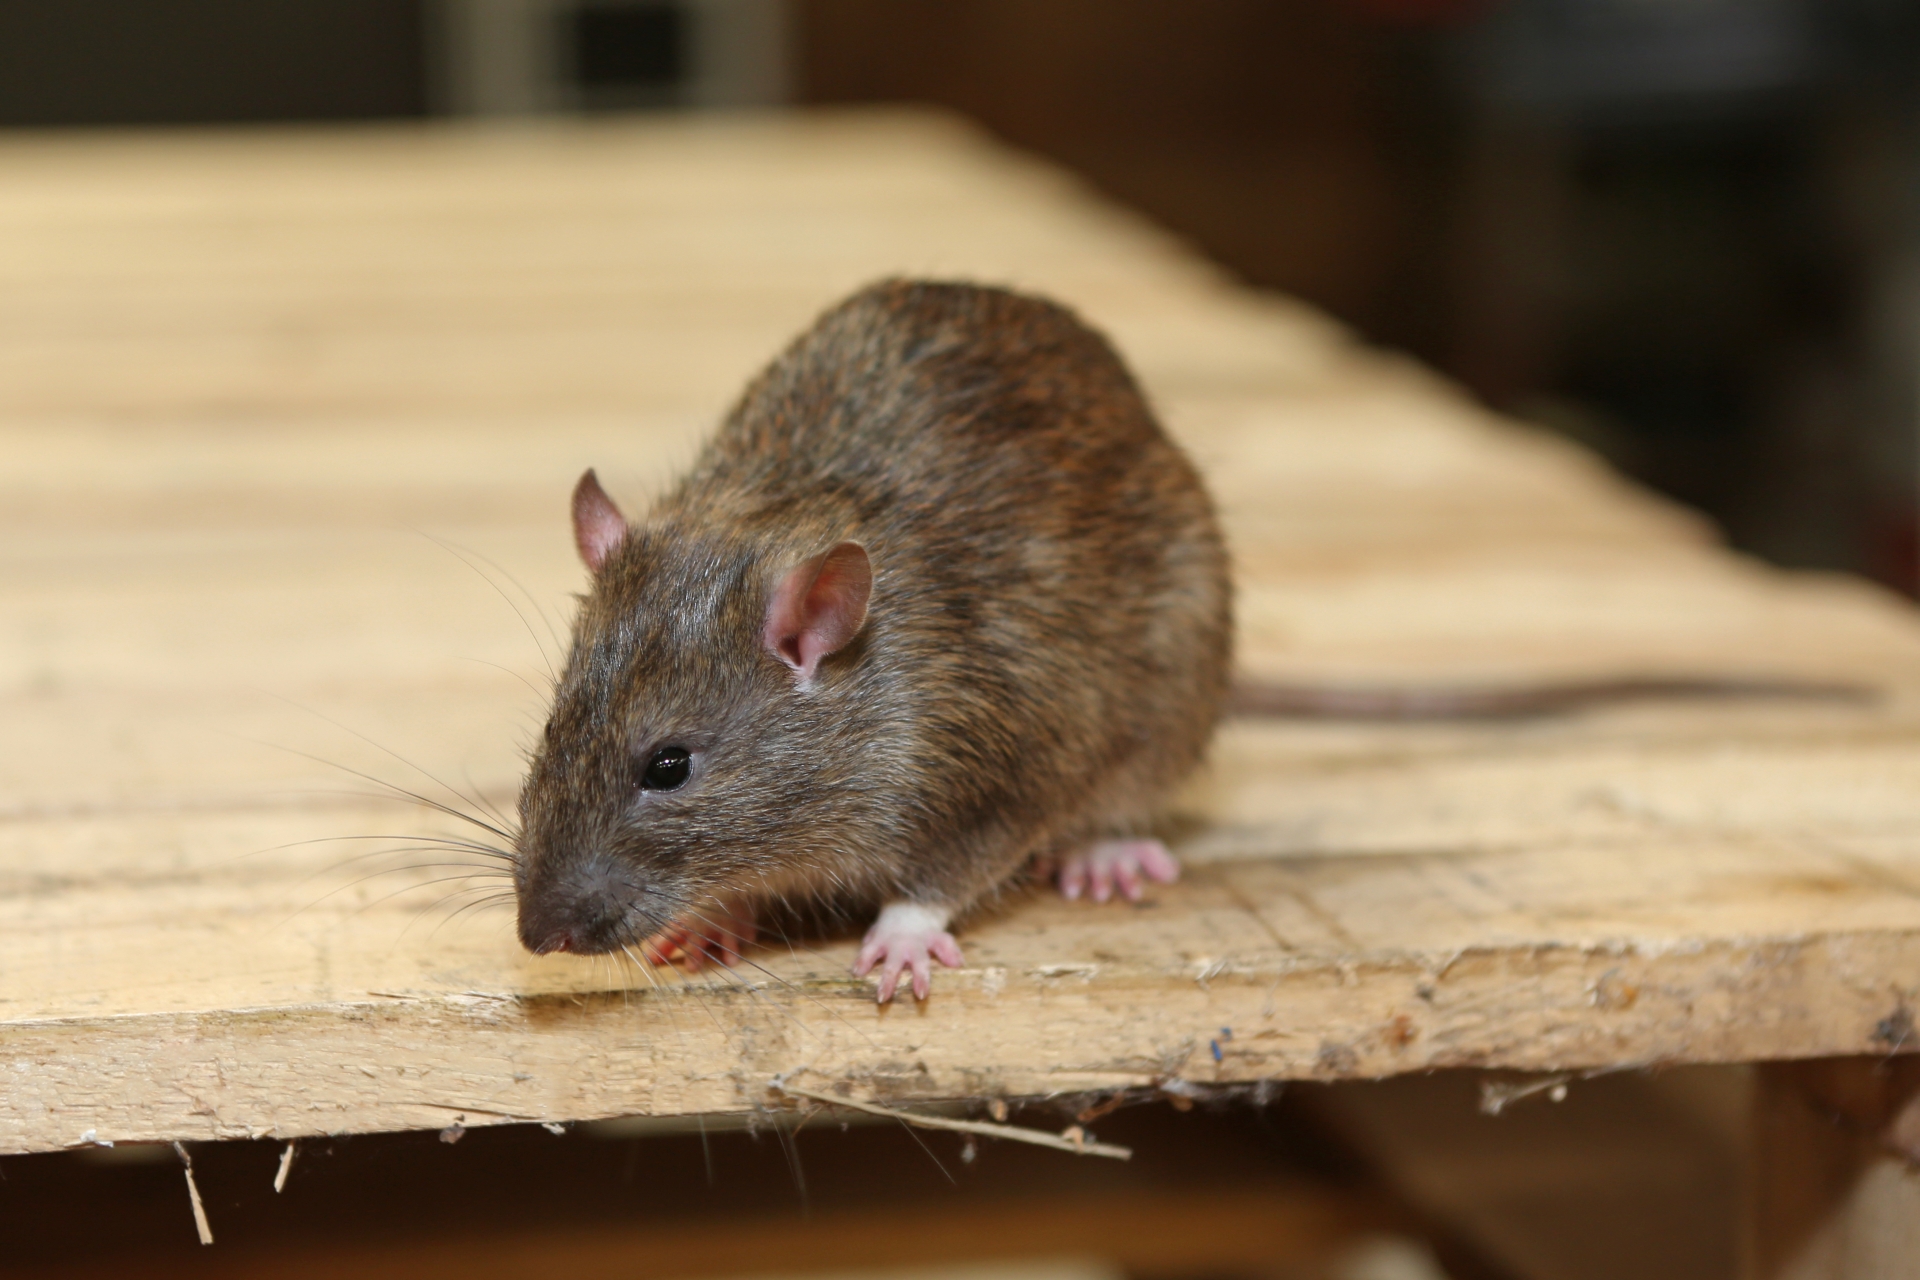 Rat Infestation, Pest Control in Swanley, Hextable, Crockenhill, BR8. Call Now 020 8166 9746